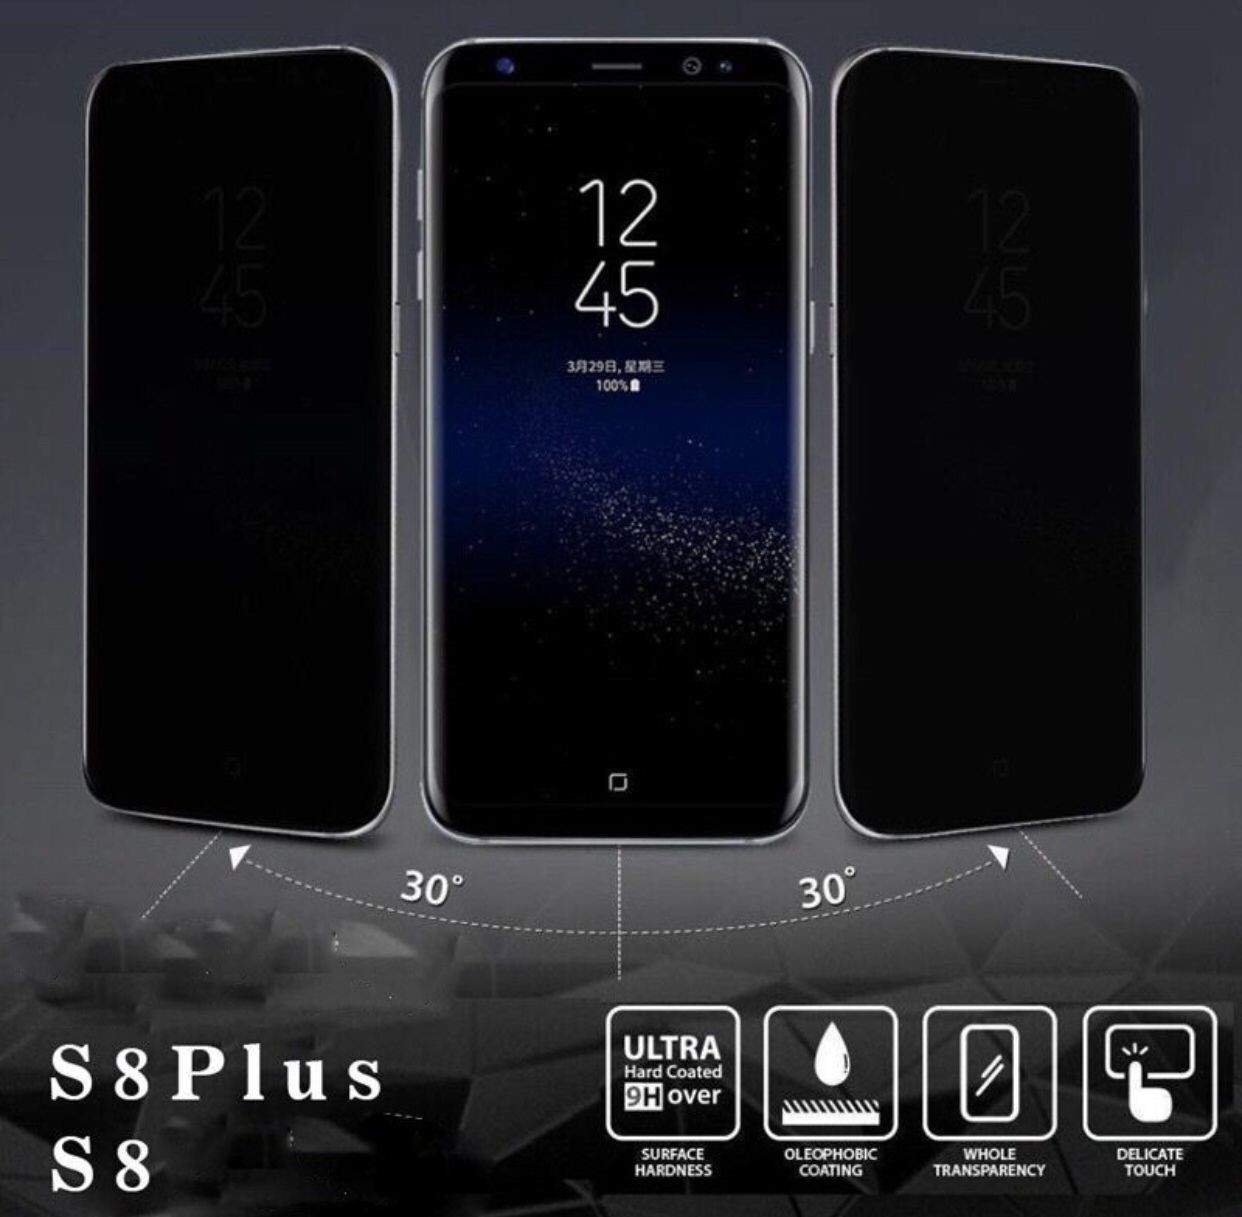  Samsung S8 Plus Privacy Screen Protector, Tiamat Tempered Glass Anti-Scratch Anti-Peeping Anti-Spy Privacy Film - White Manufactures